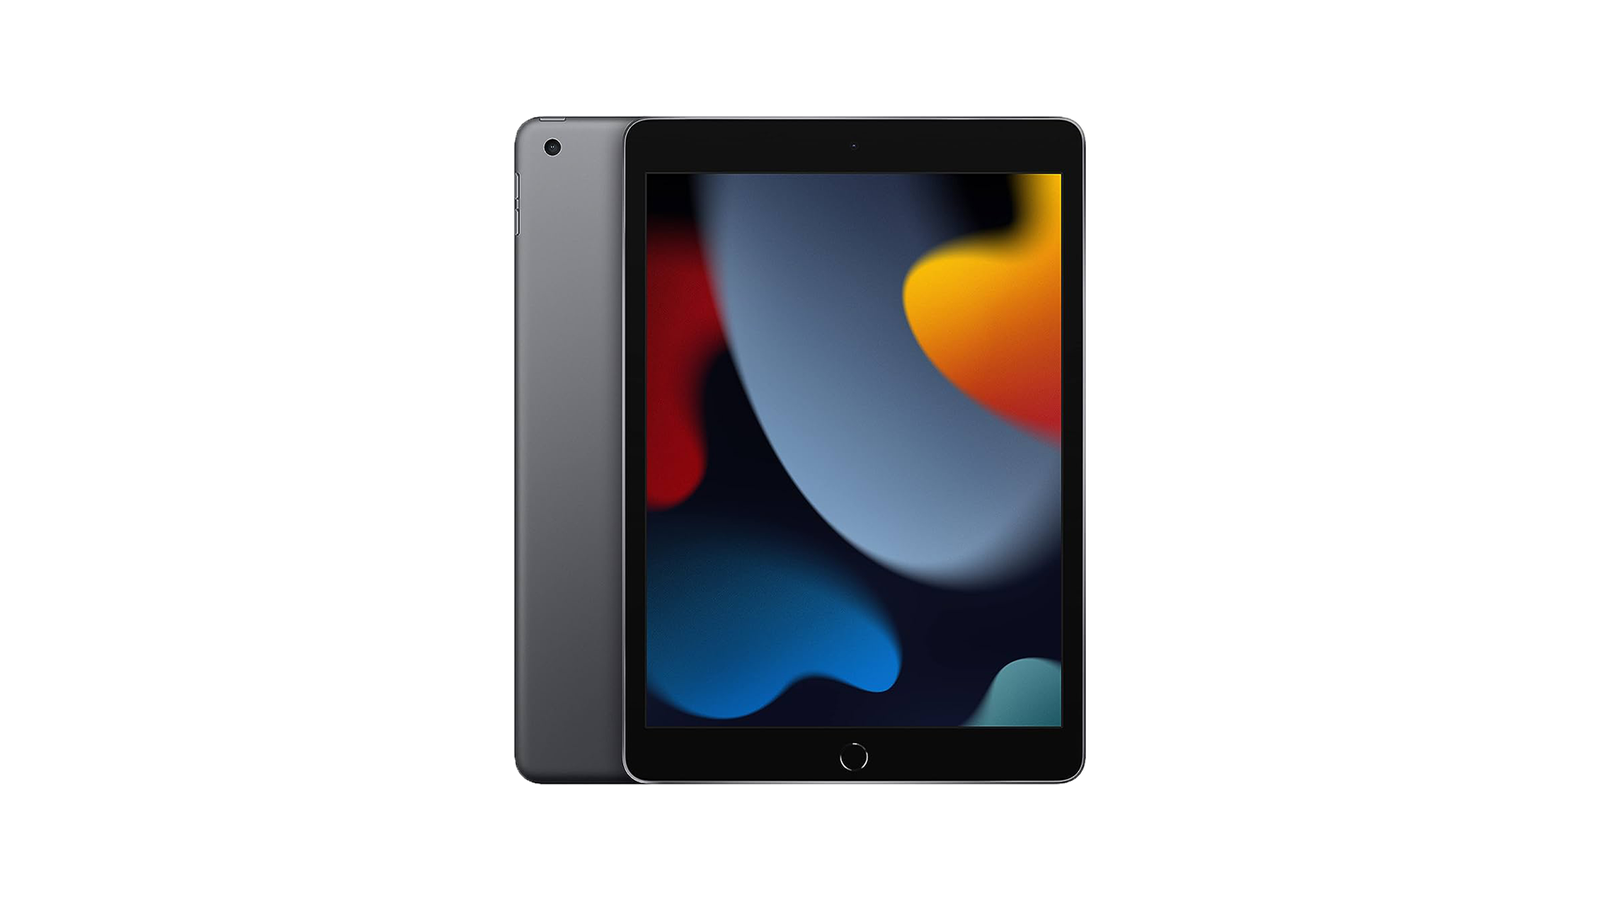 Apple iPad 10.2 (2021) - An inexpensive iPad for beginning graphic artists